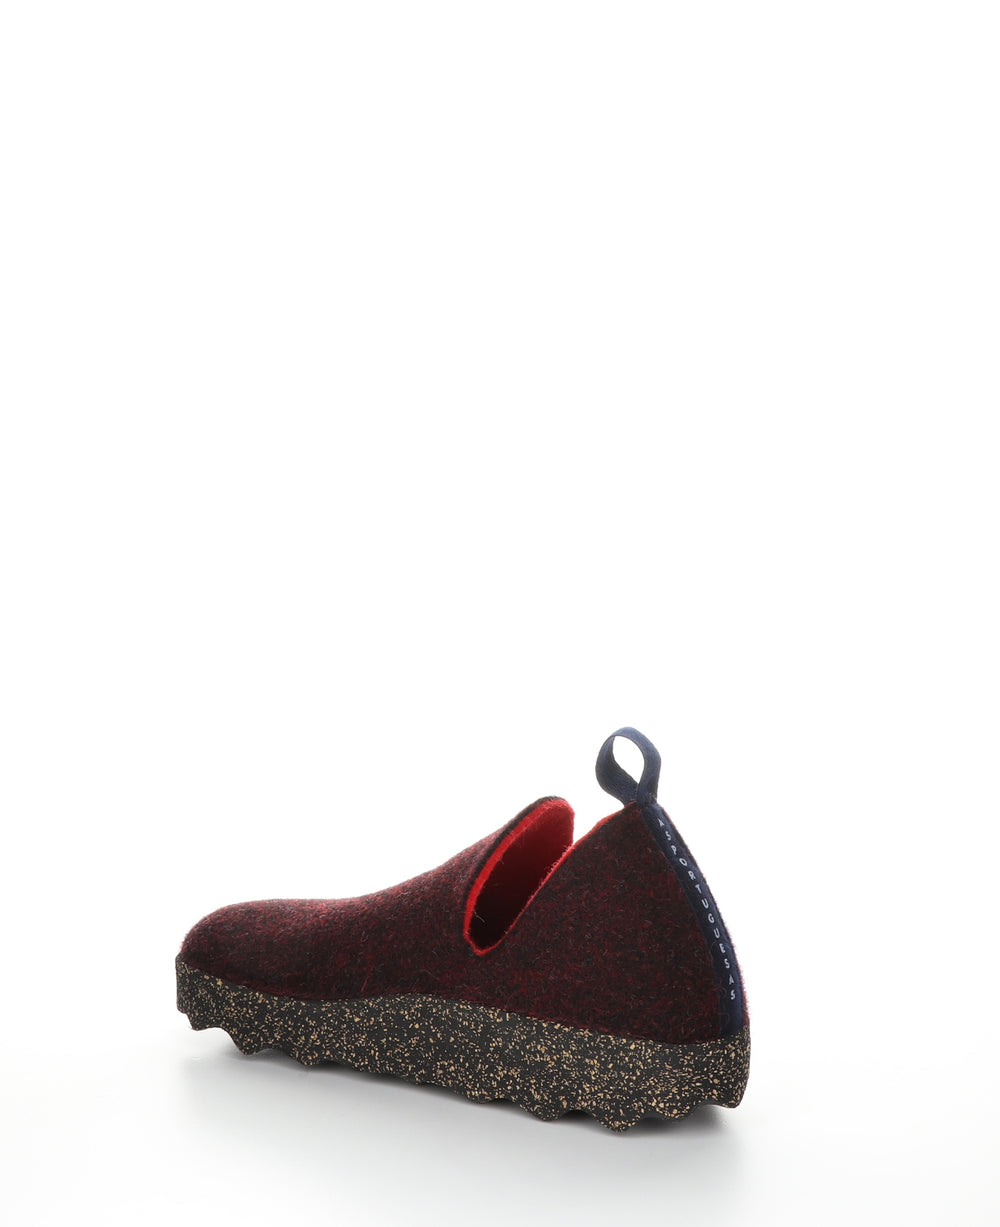 CITY Merlot Round Toe Shoes|CITY Chaussures à Bout Rond in Rouge